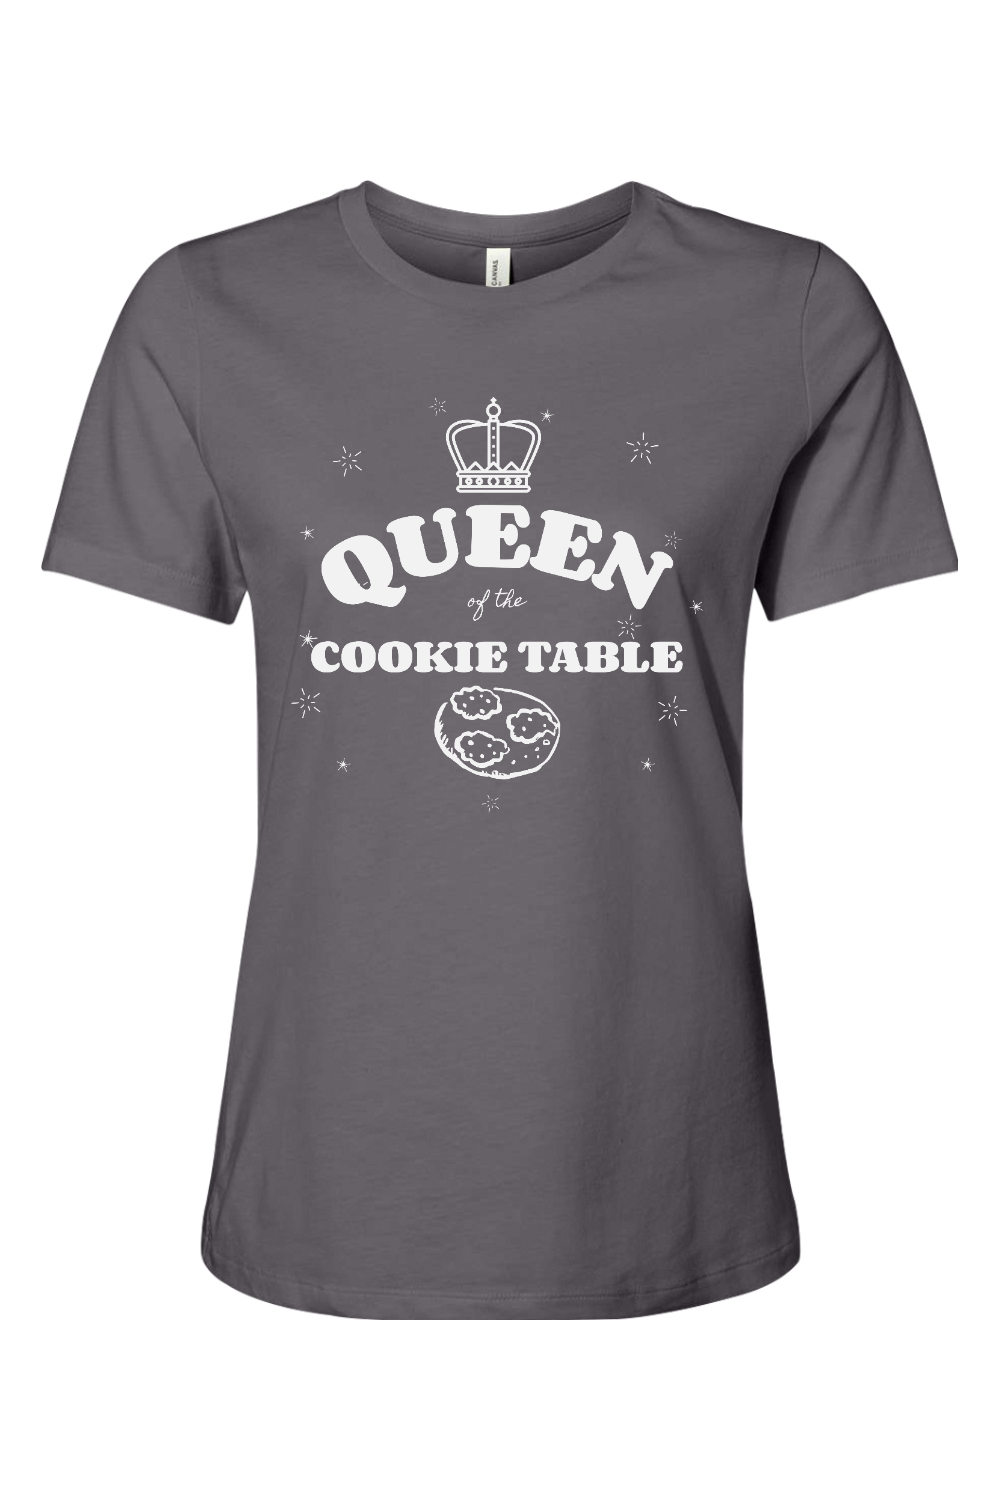 Queen of the Cookie Table - Bella + Canvas Women’s Relaxed Jersey Short Sleeve Tee - Yinzylvania